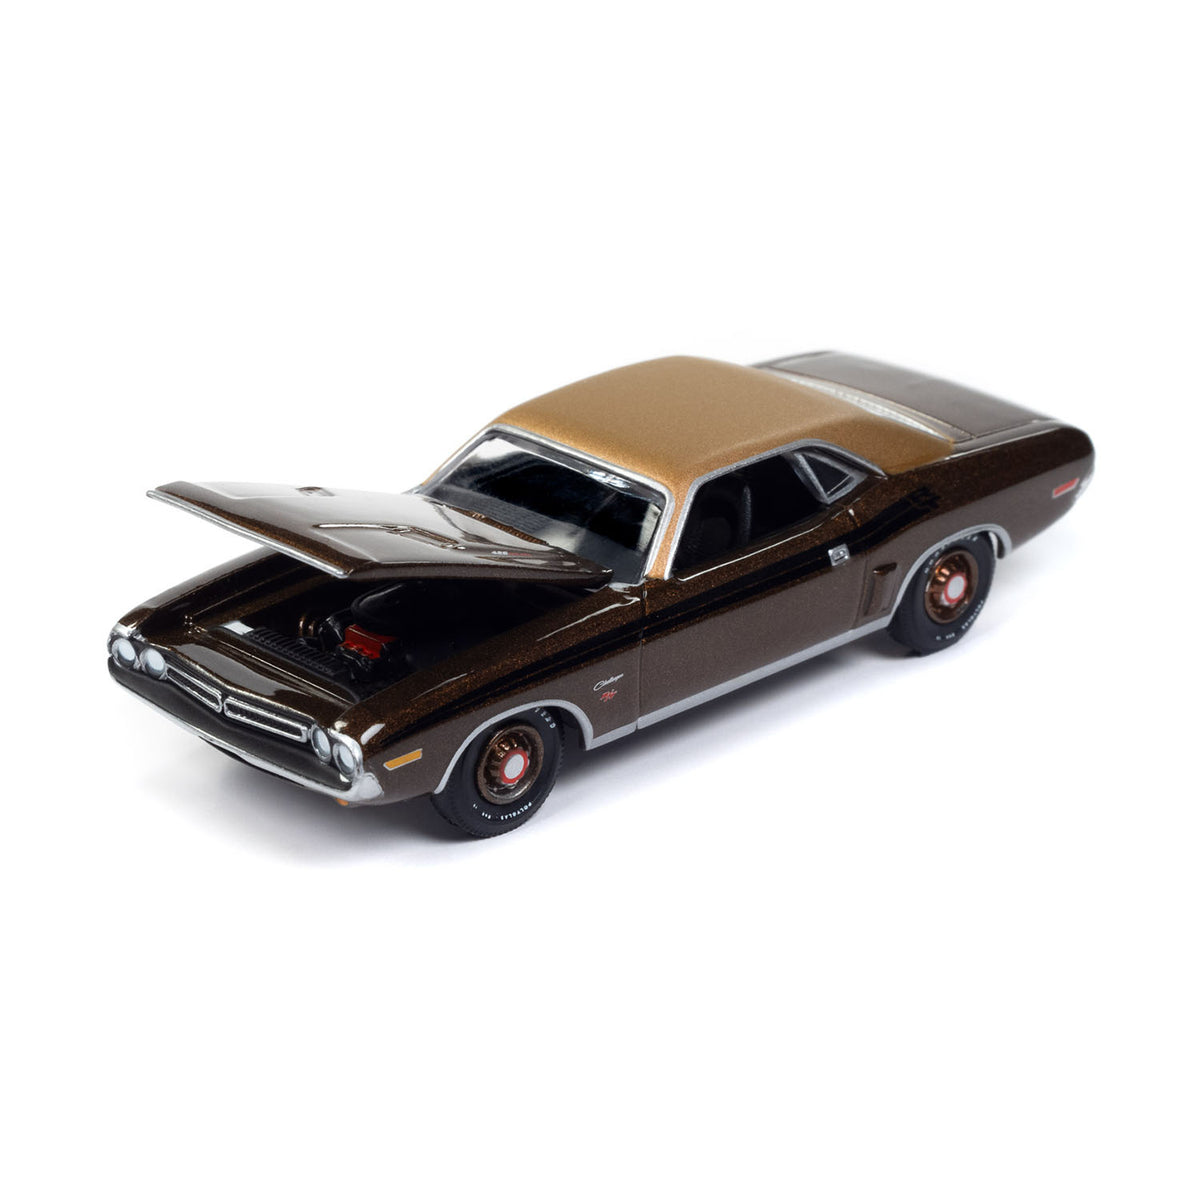 1971 Dodge Challenger R/T 1:64 Diecast in Brown - Angled Left Side Open Hood View